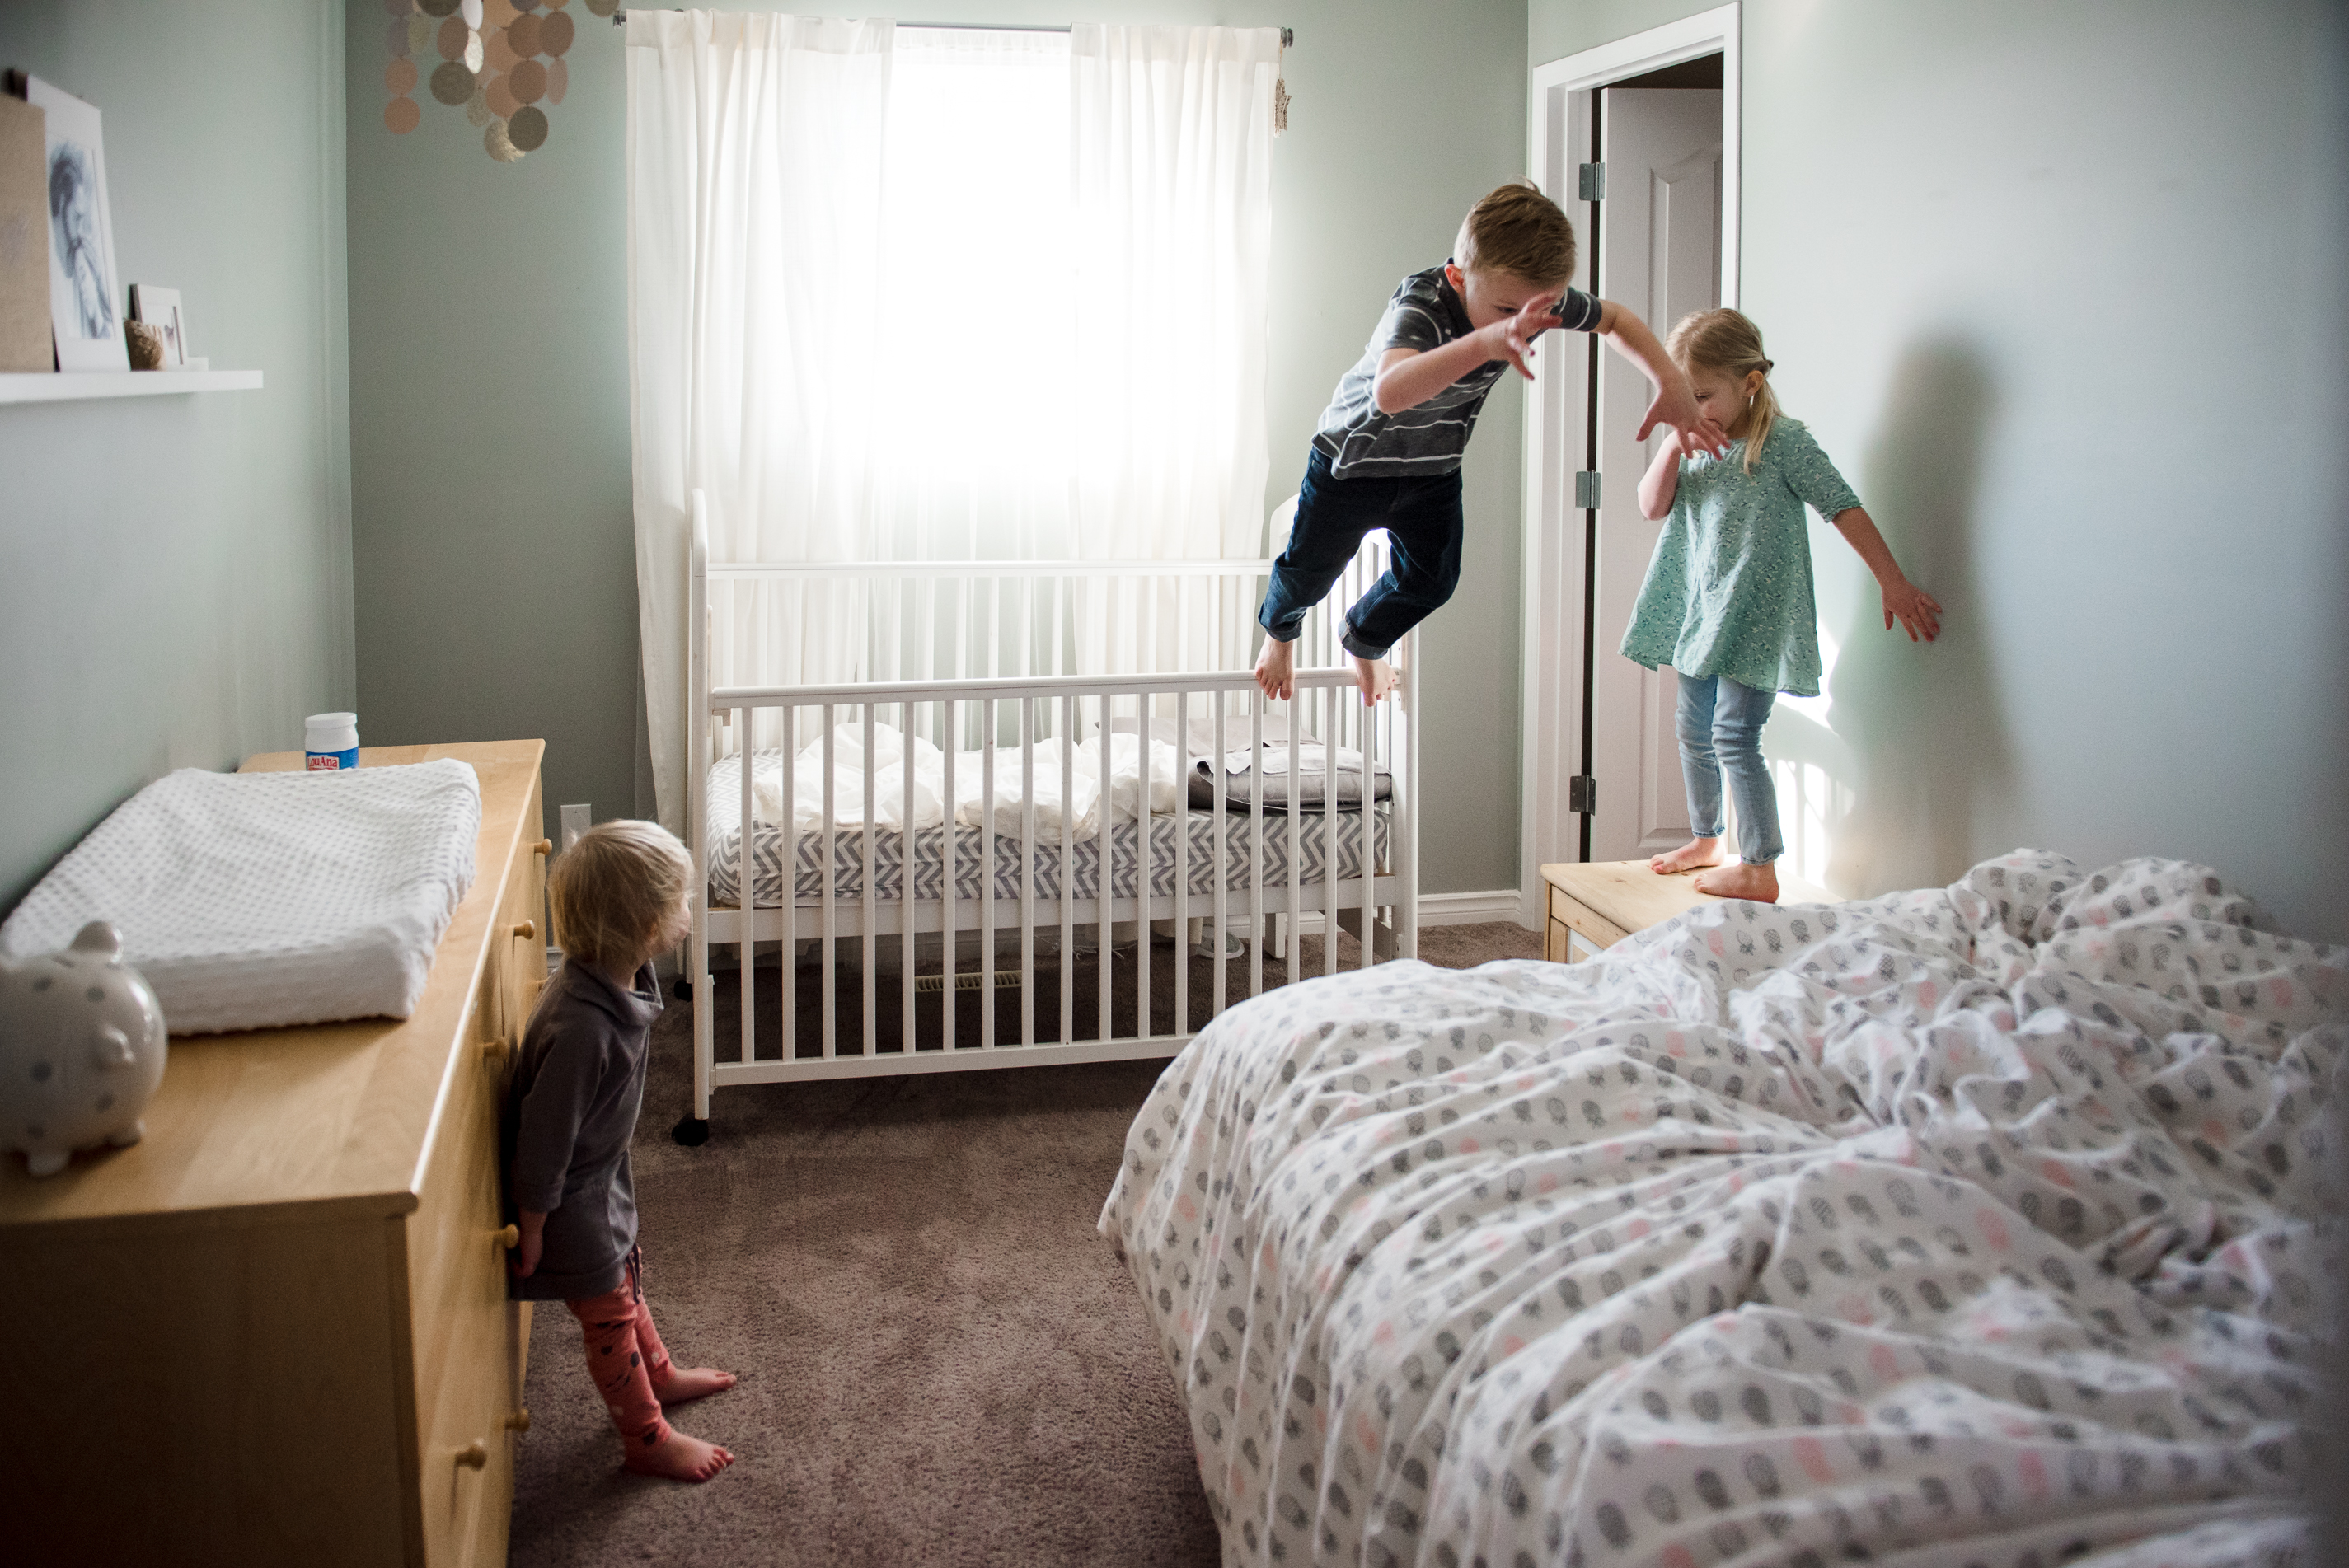 Kids jump from a crib to a bed in a home